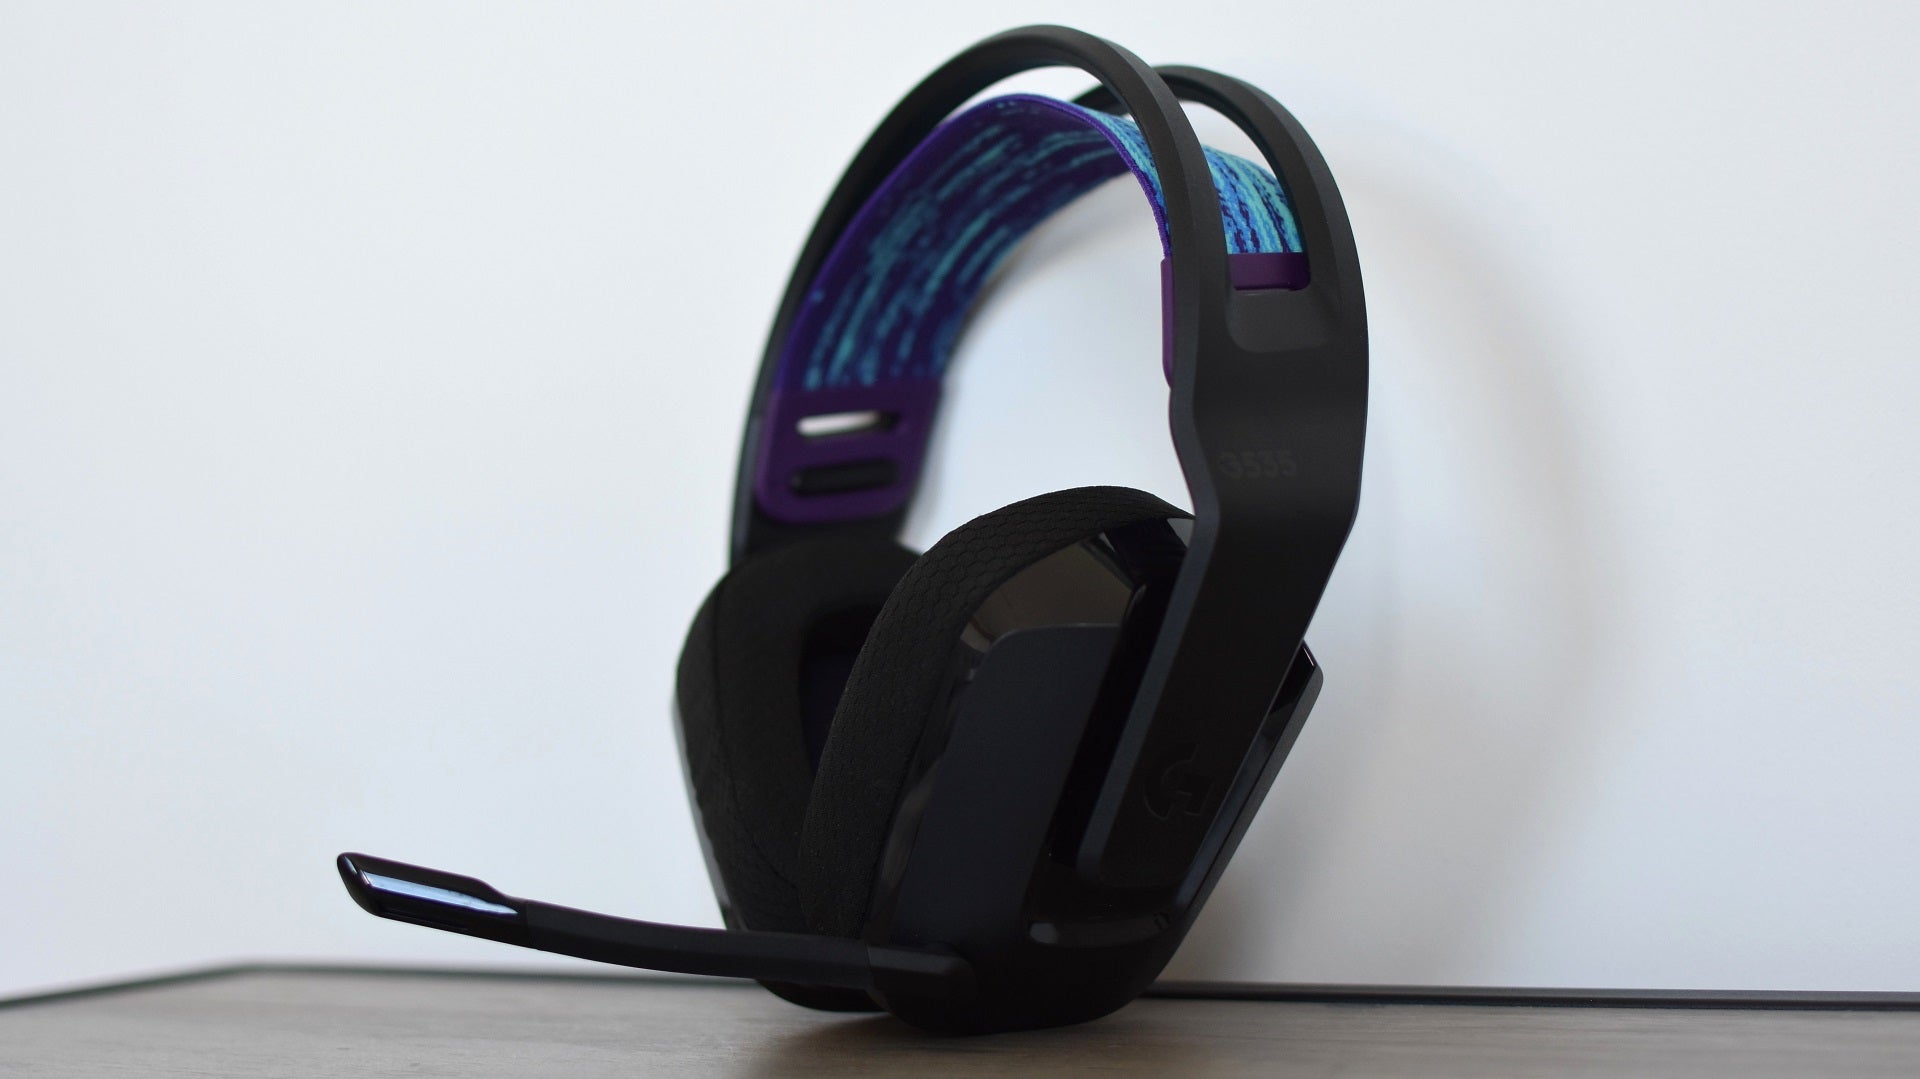 The Logitech G535 gaming headset propped up against a wall.